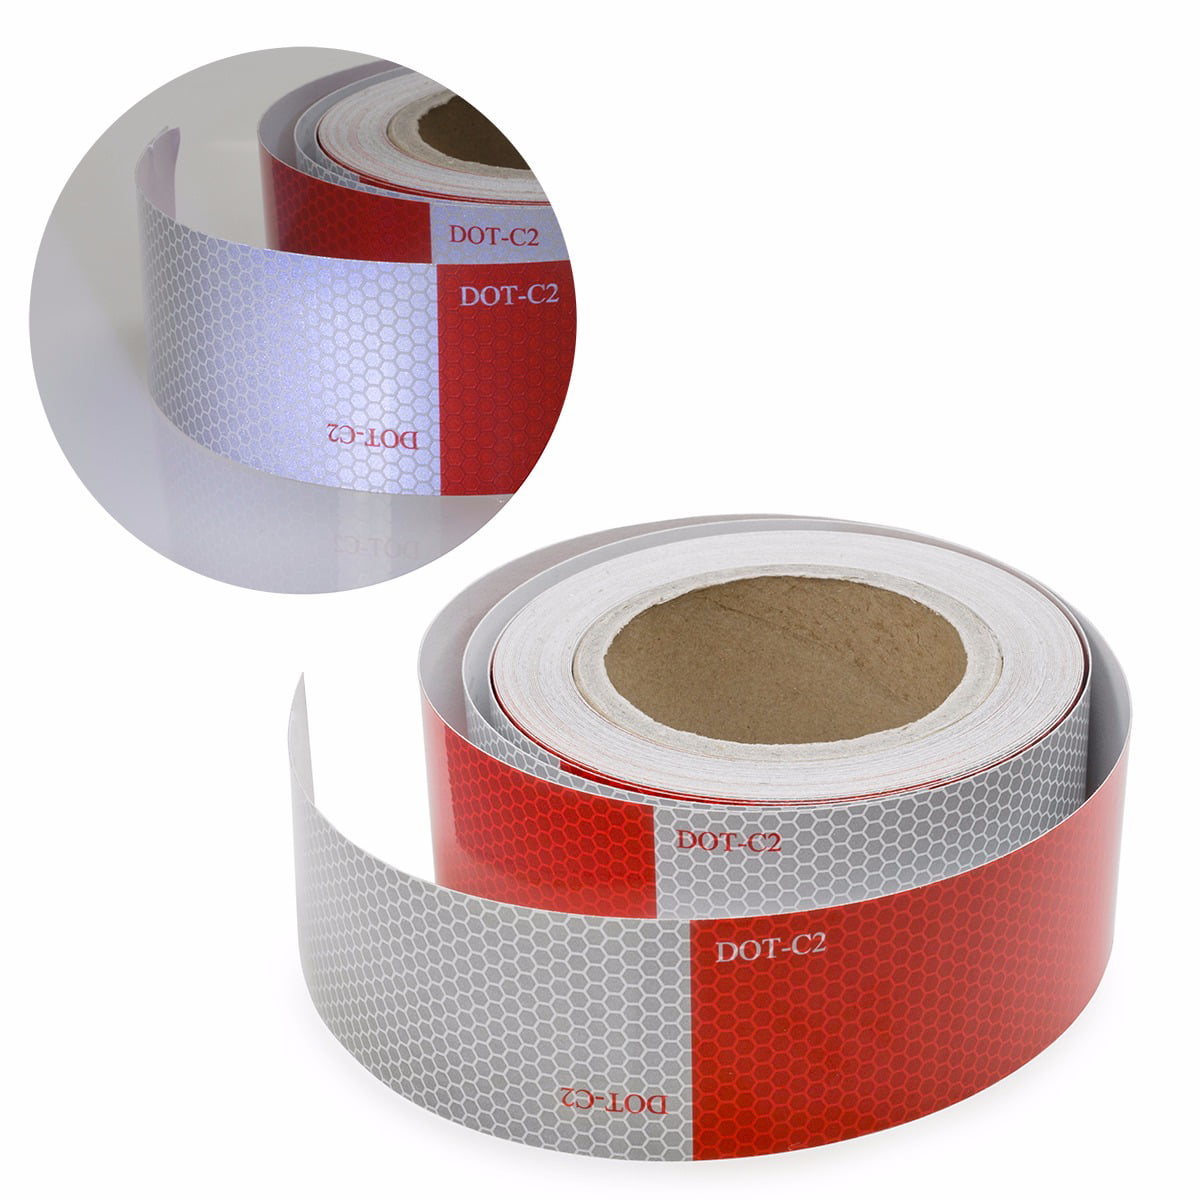 2PC DOT-C2 Conspicuity Reflective Tape 2''x150' Red White Strip Trailer RV Truck 